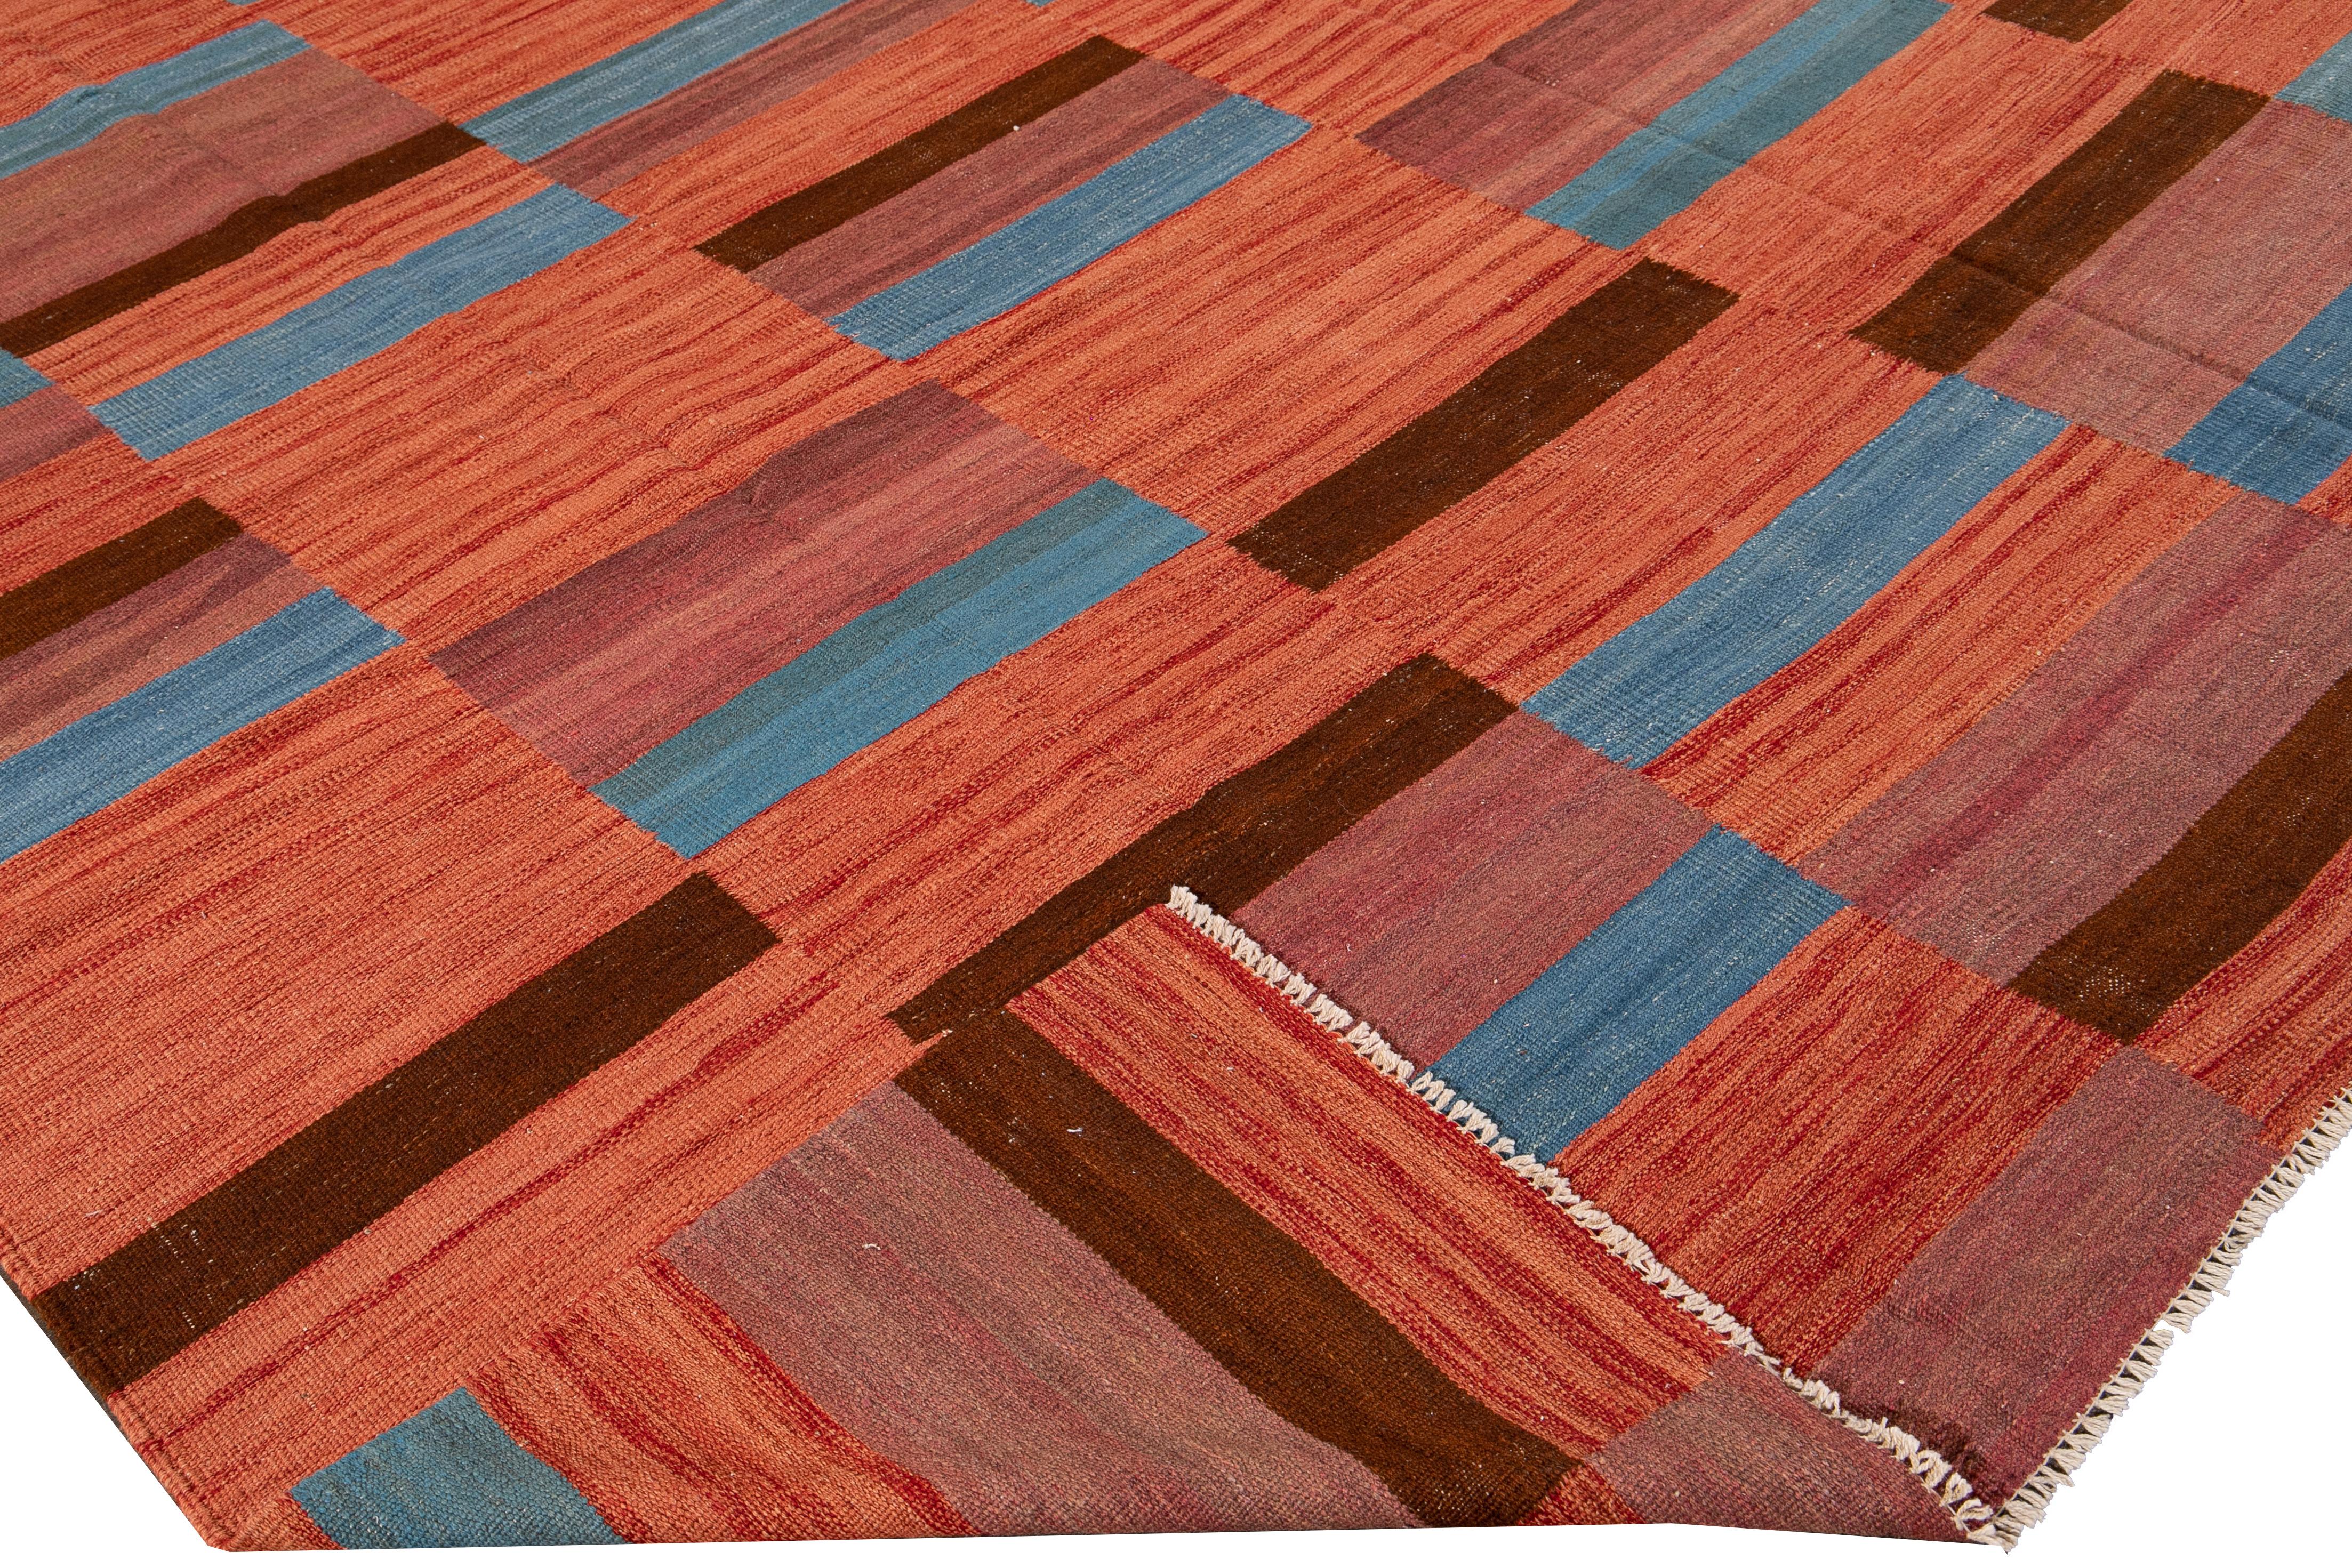 Beautiful modern Kilim flat-weave wool rug with an orange field. This kilim rug has a blue and brown accent in a gorgeous geometric abstract design.

This rug measures: 8'3